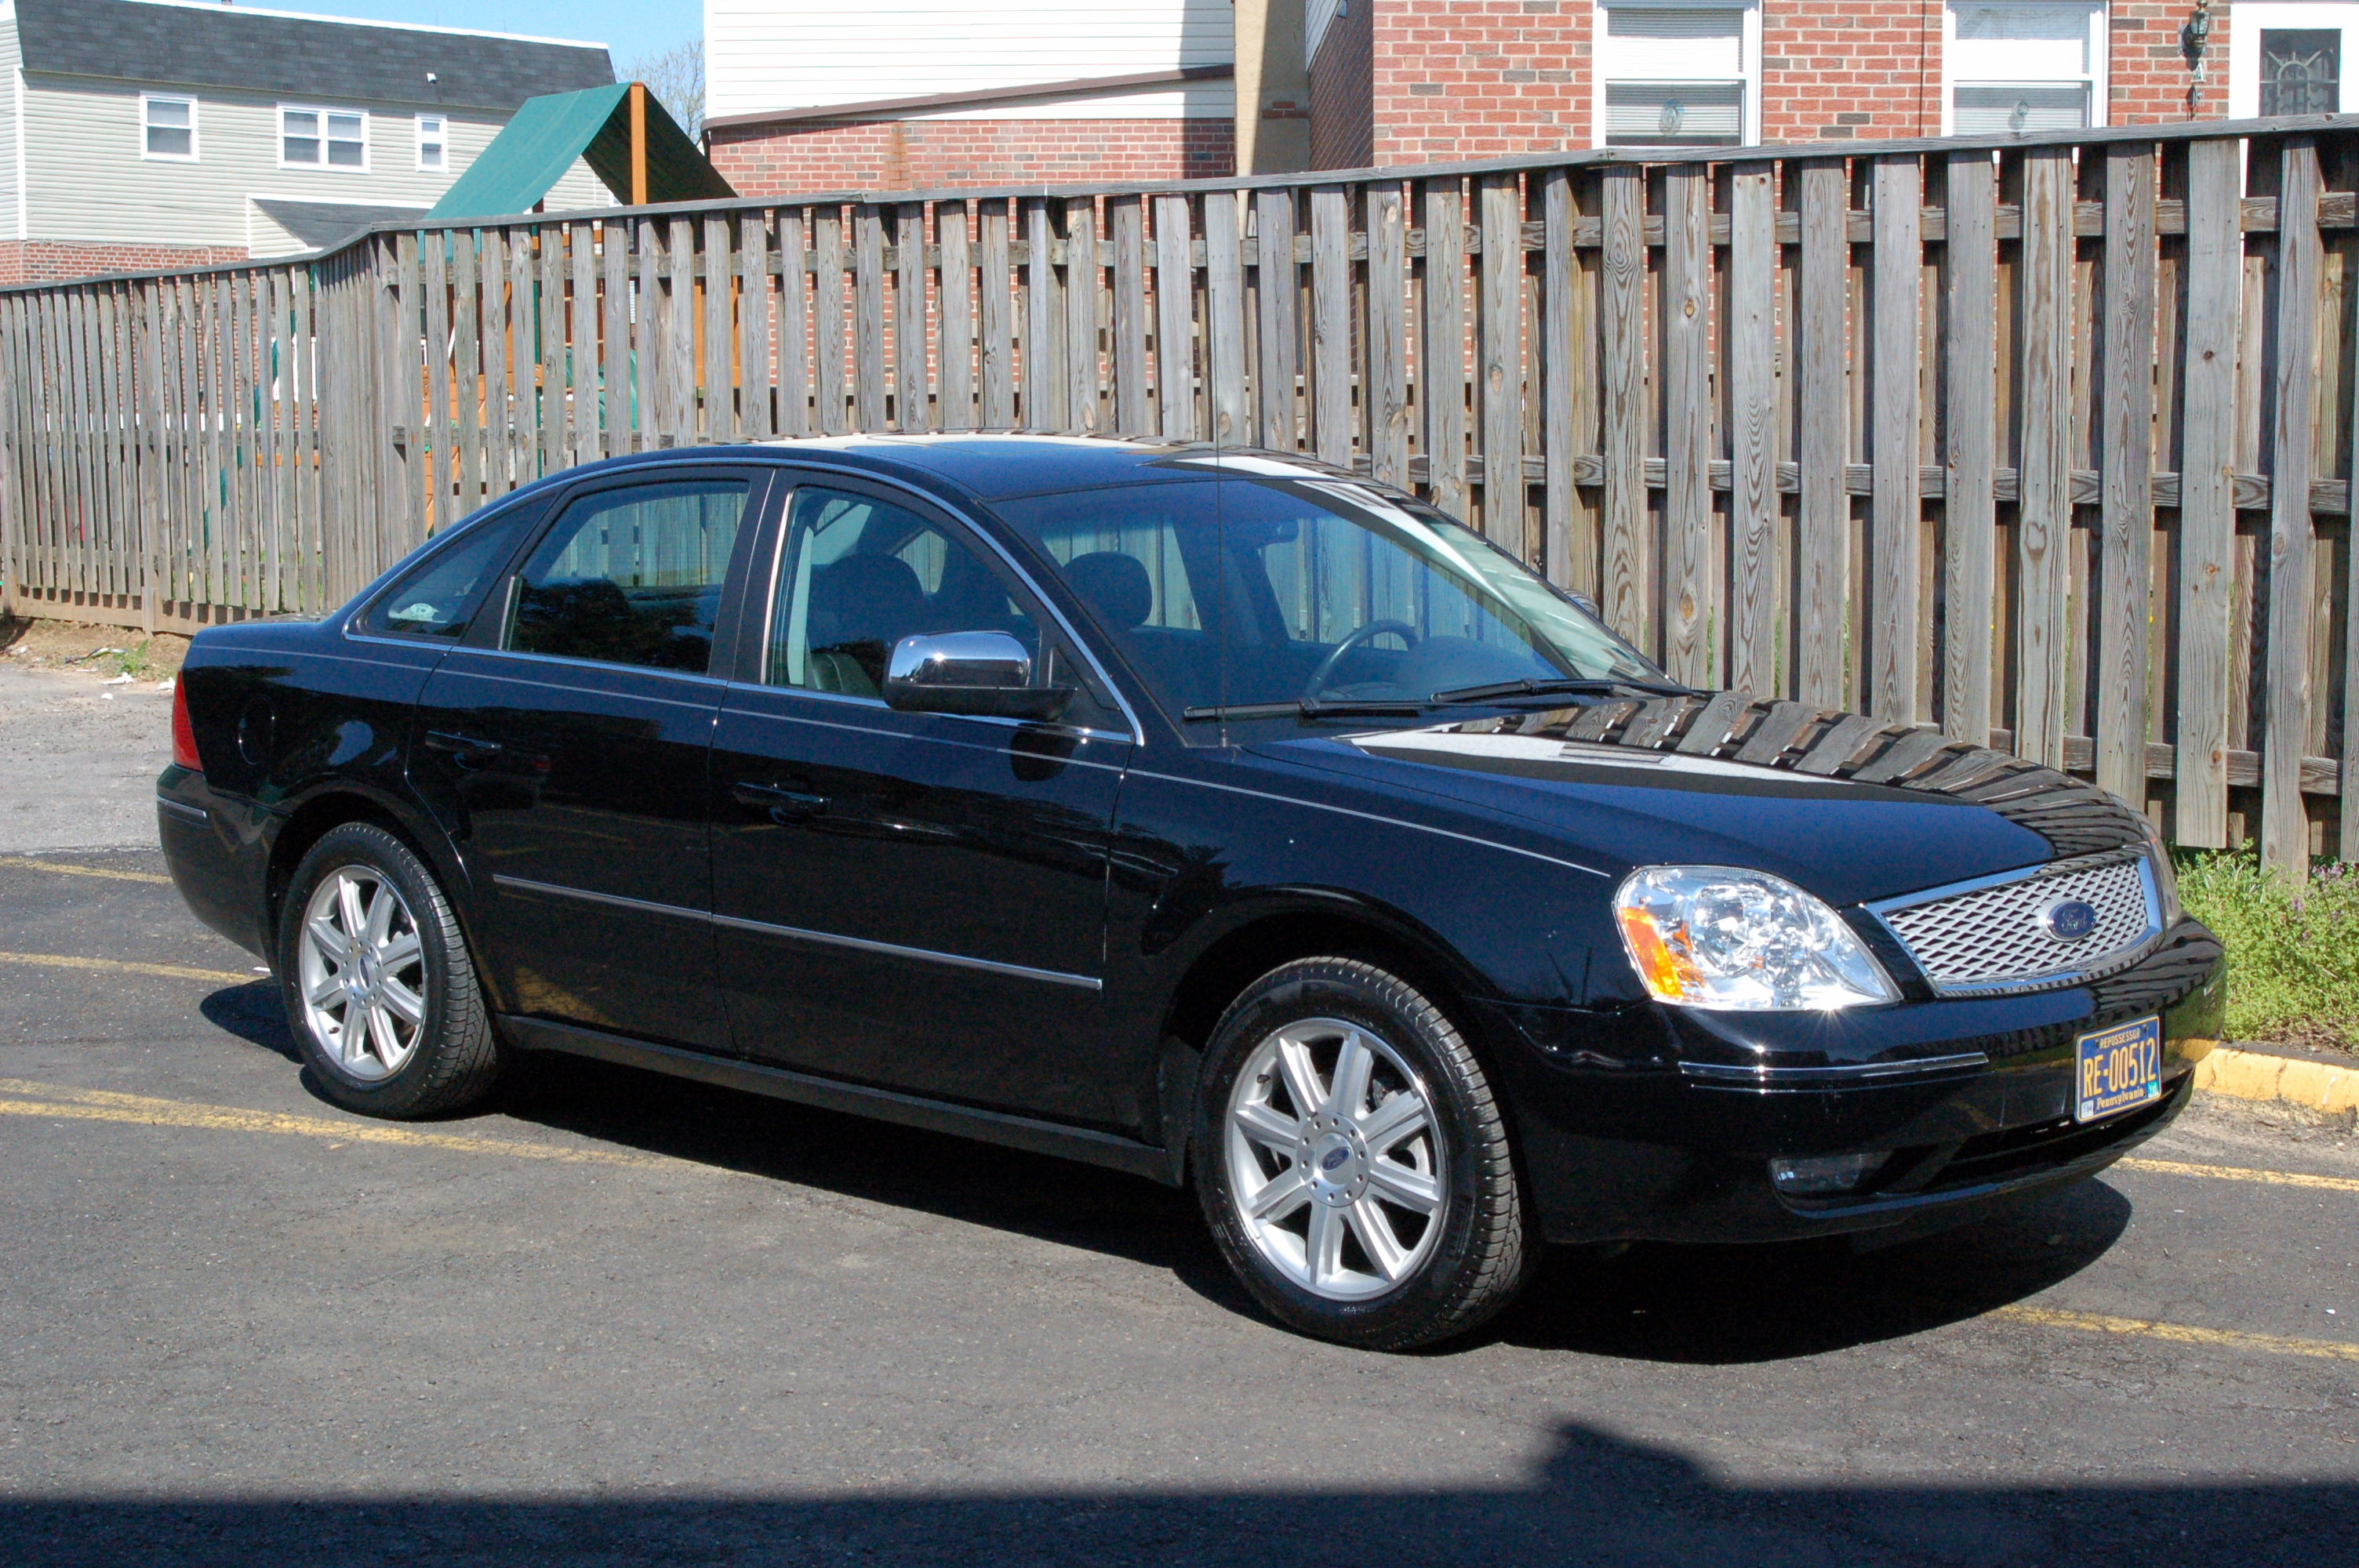 Ford Five Hundred - Wikipedia